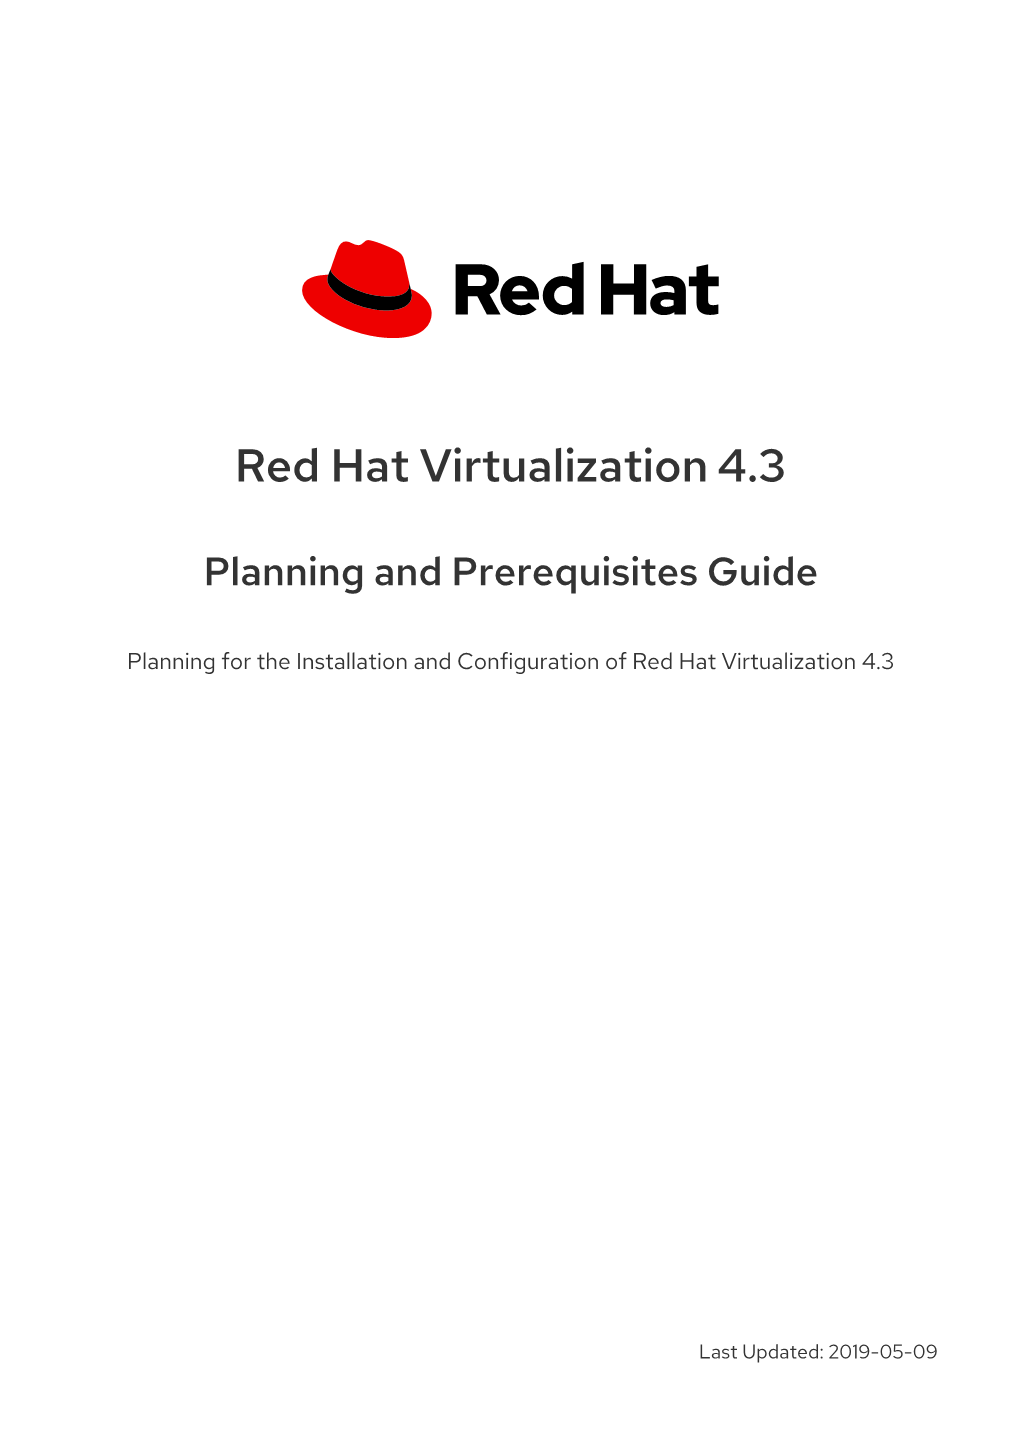 Red Hat Virtualization 4.3 Planning and Prerequisites Guide